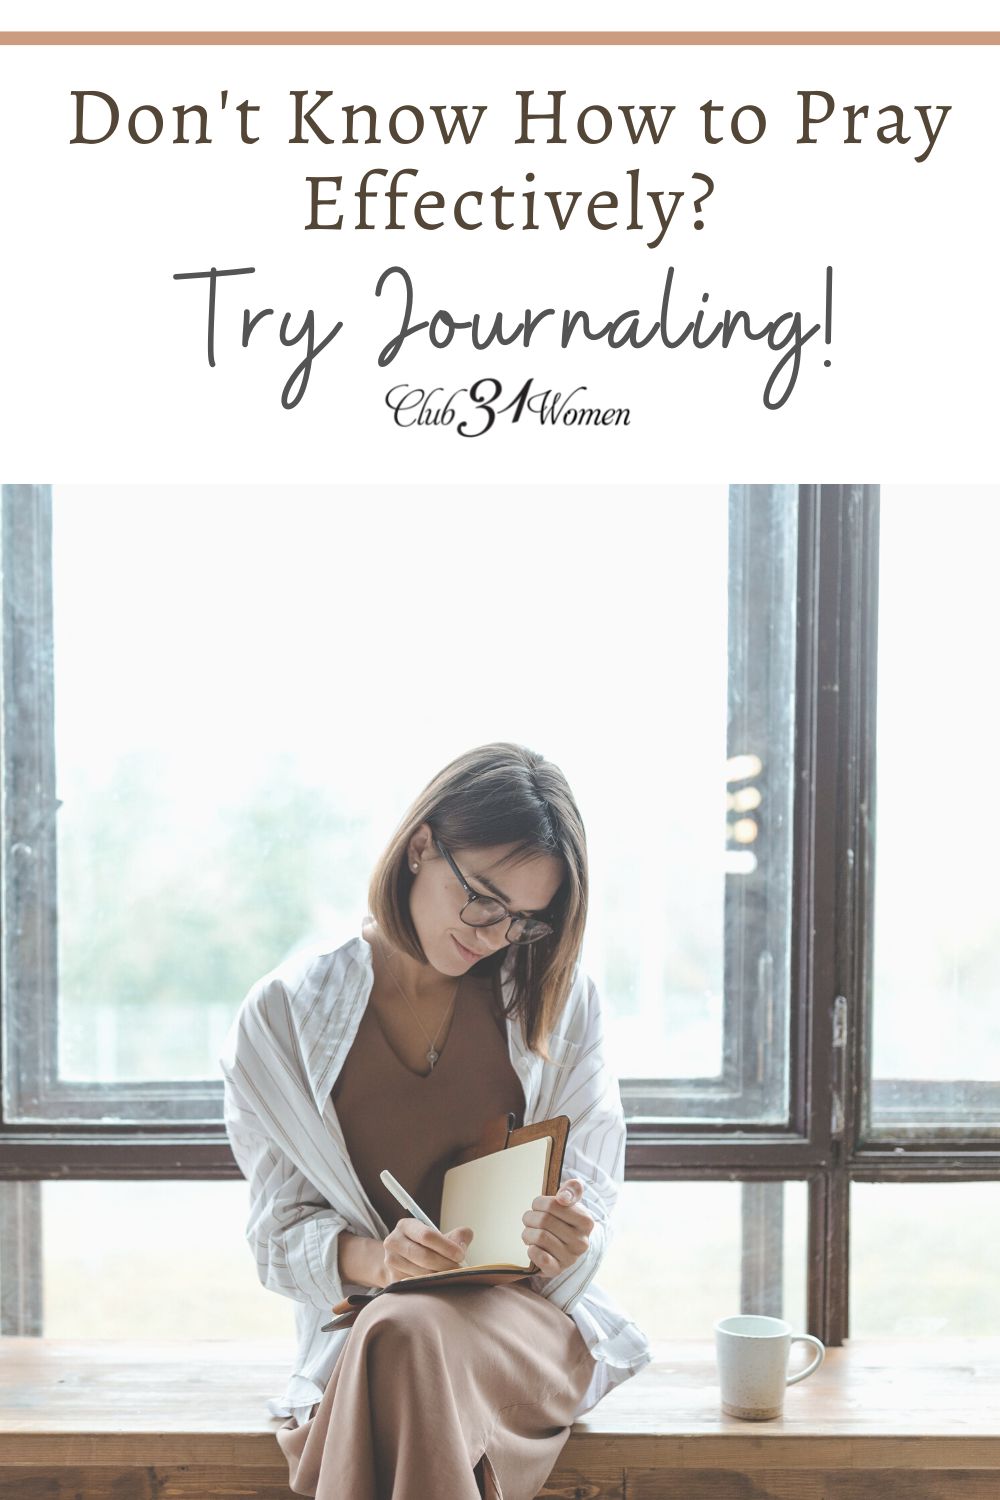 Don’t Know How to Pray Effectively? Try Journaling! via @Club31Women